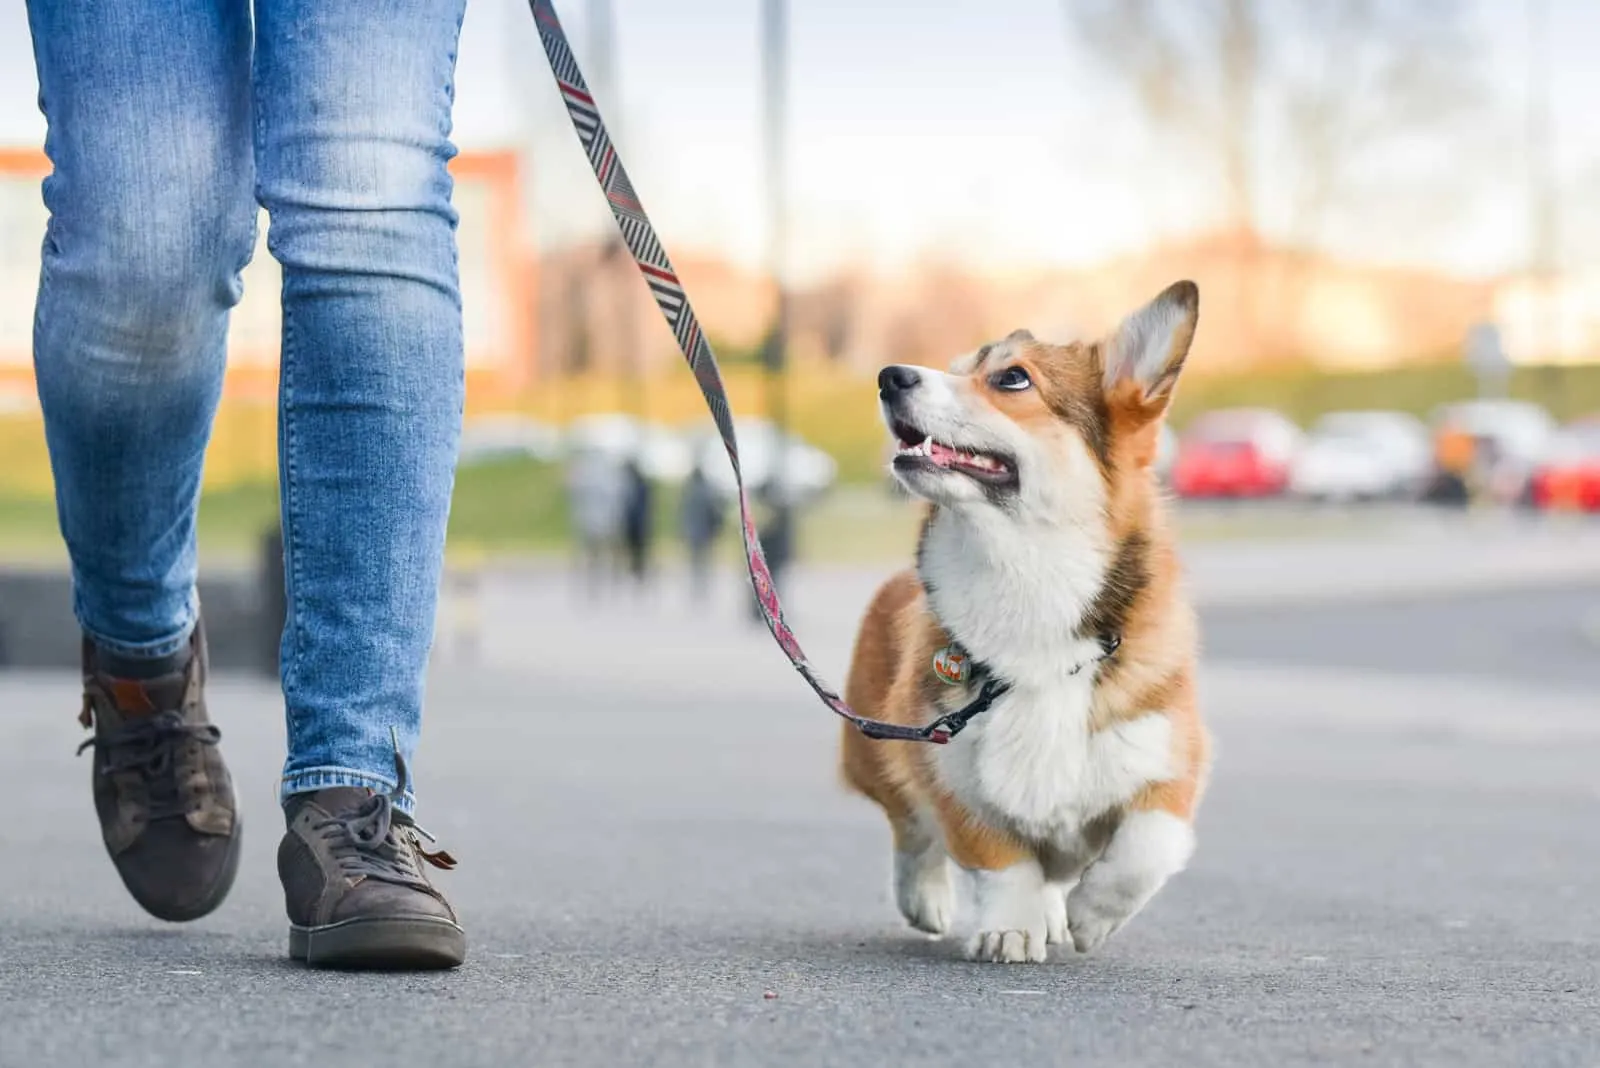 dog walking nicely on a leash with an owner